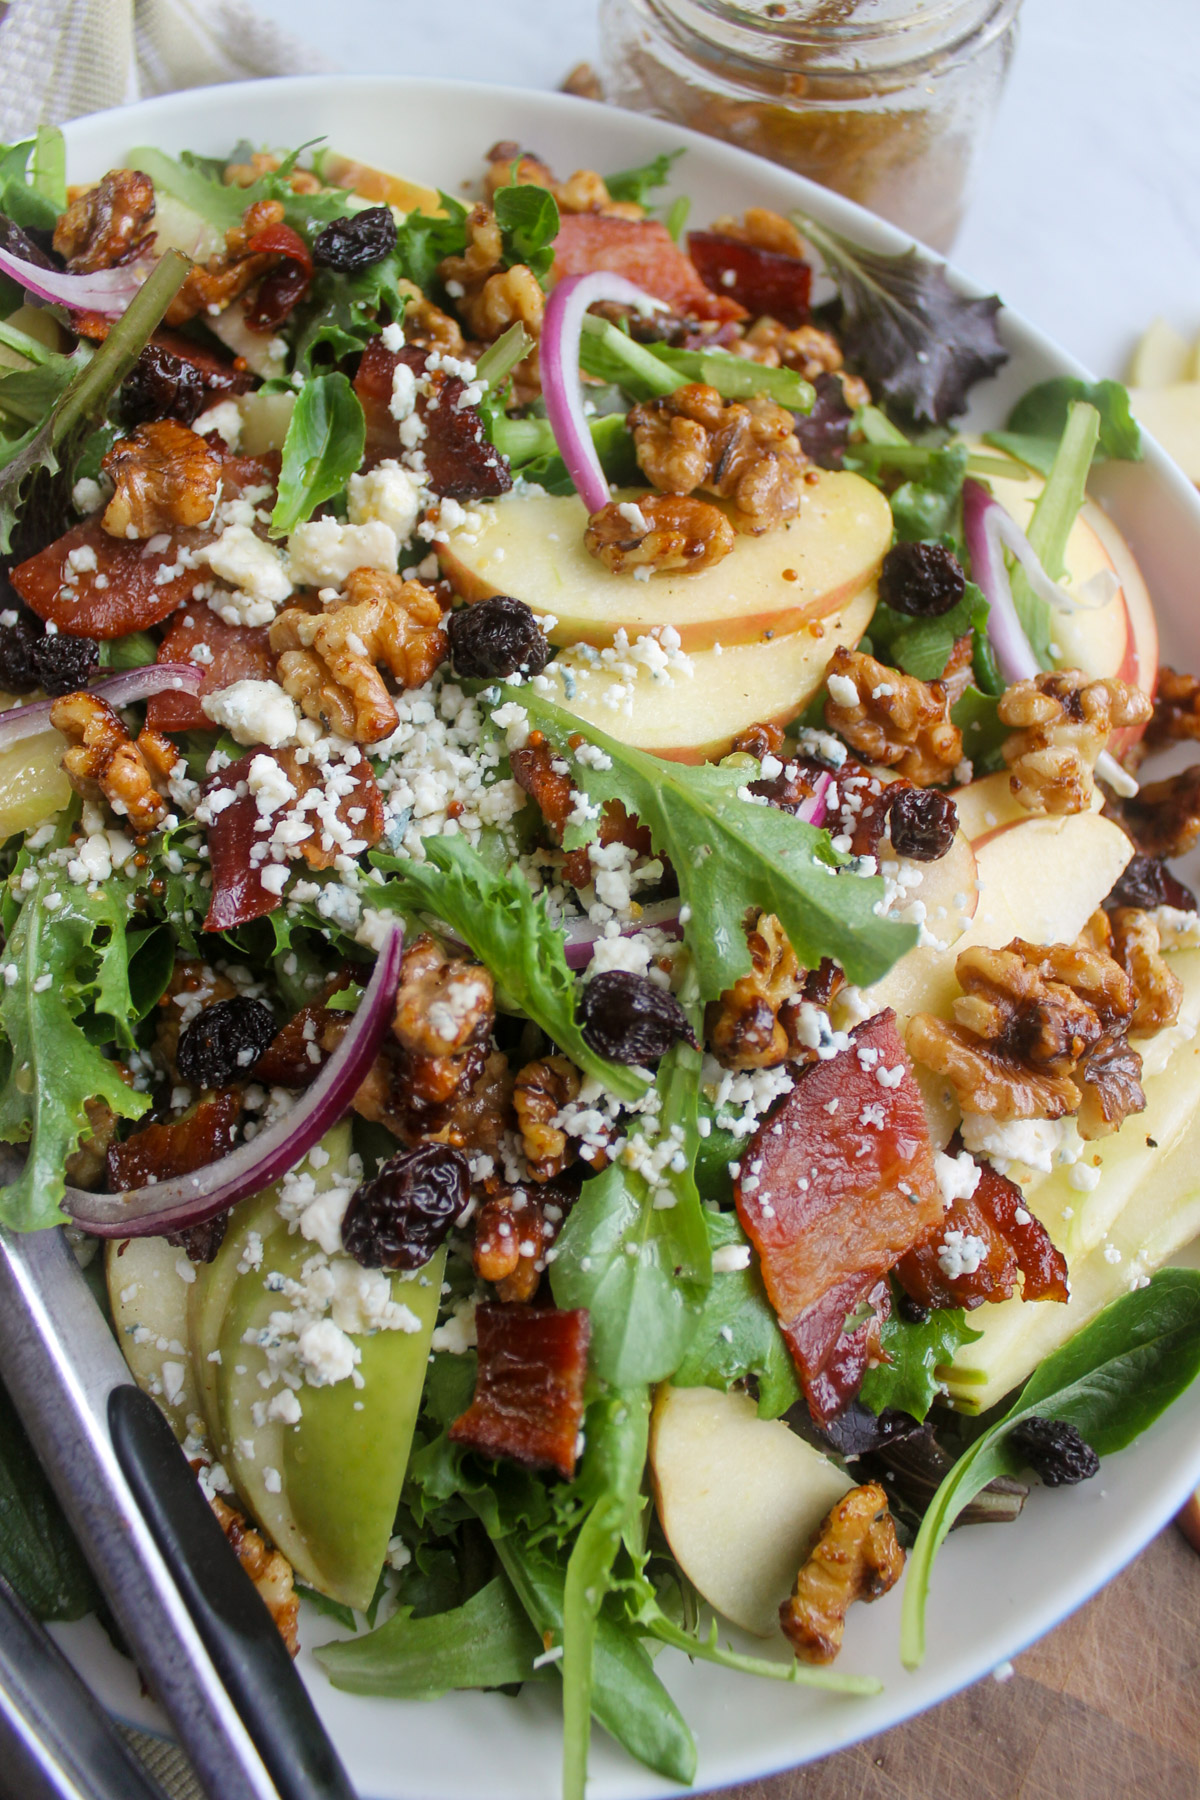 A salad with slices of apple, raisins, onions, blue cheese and nuts.